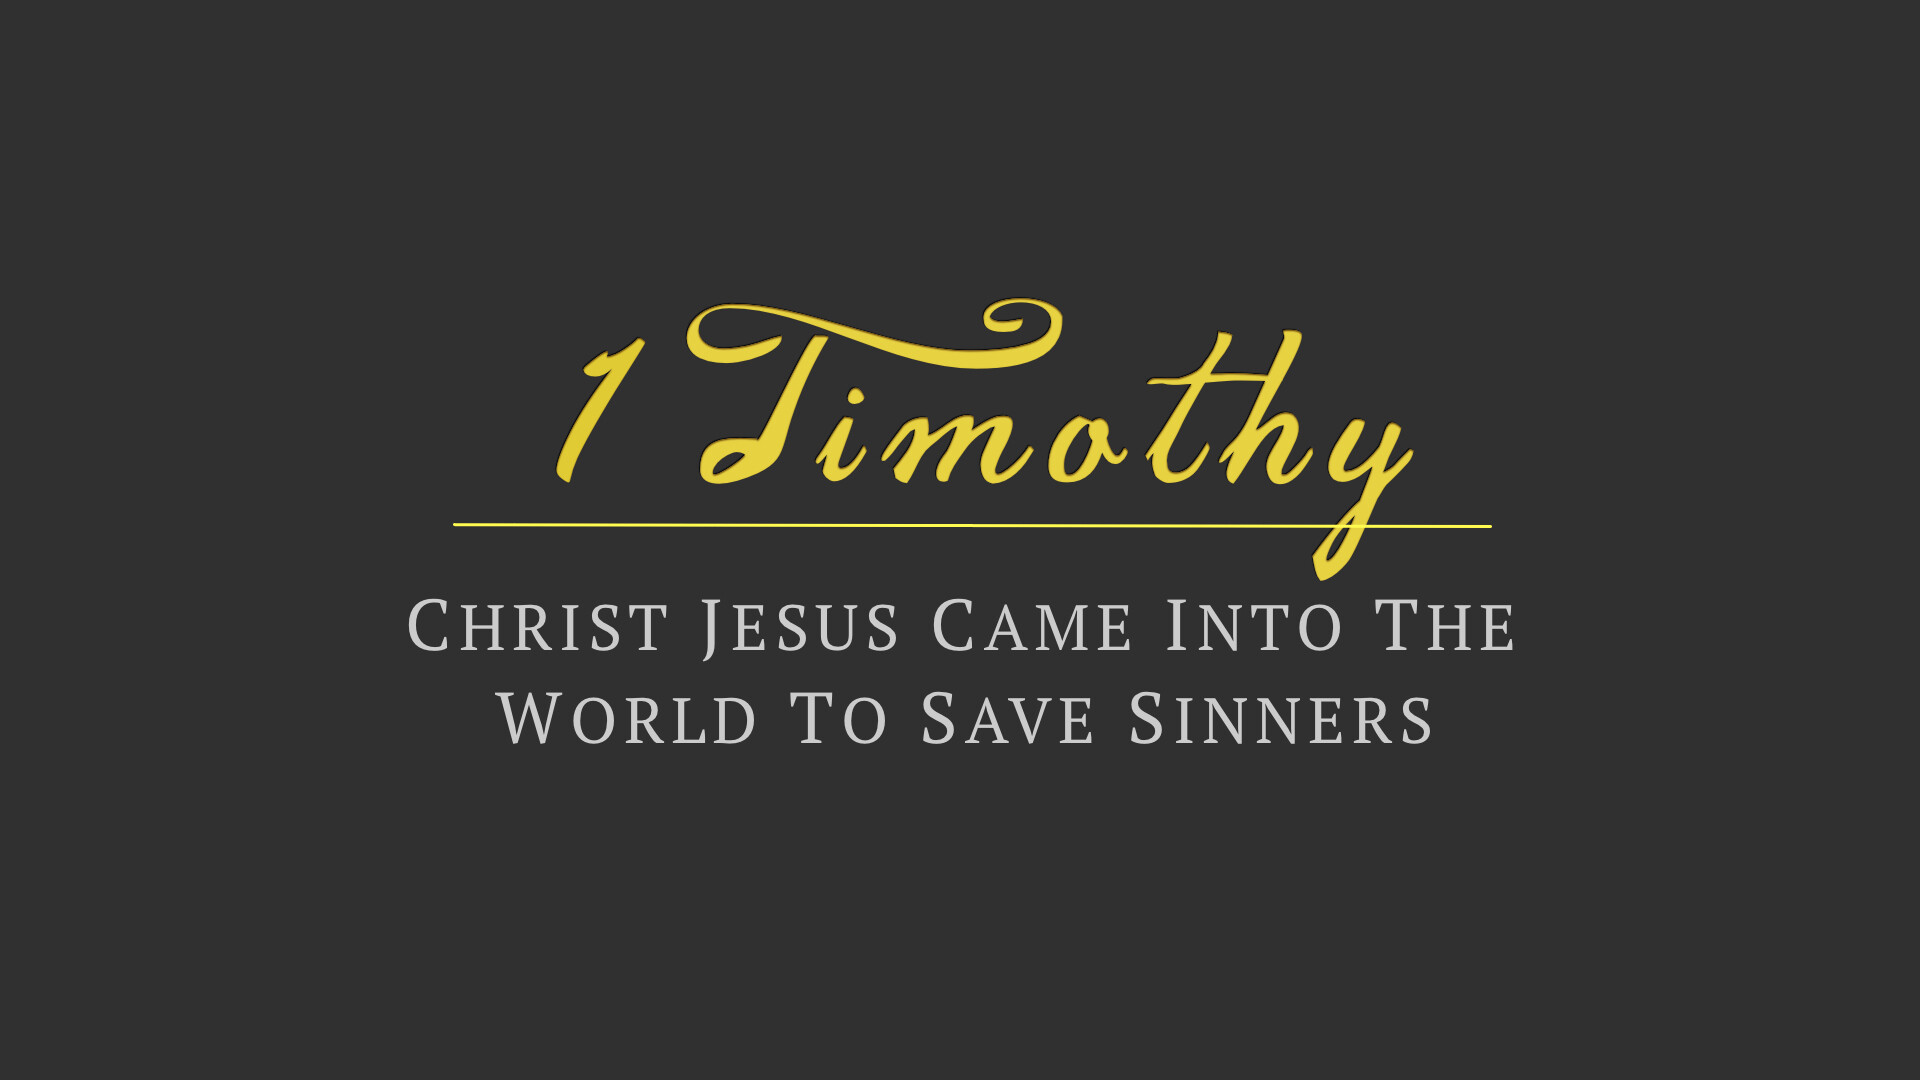 Christ Jesus Came Into the World To Save Sinners